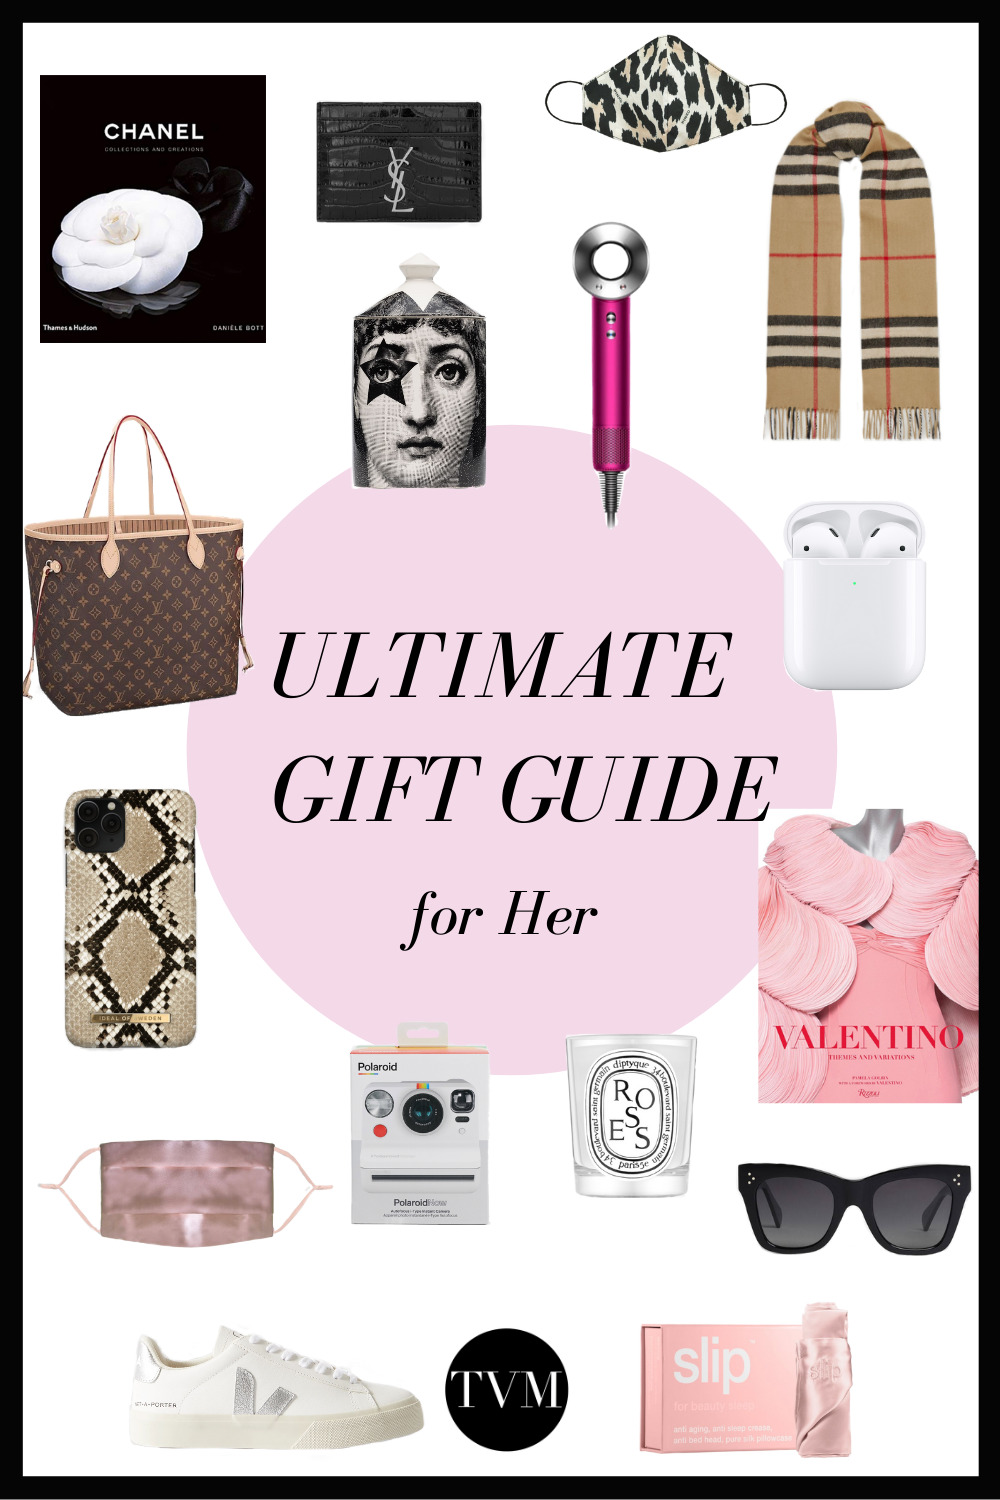 THE ULTIMATE GIFT GUIDE FOR HER THE VANITY MAGAZINE